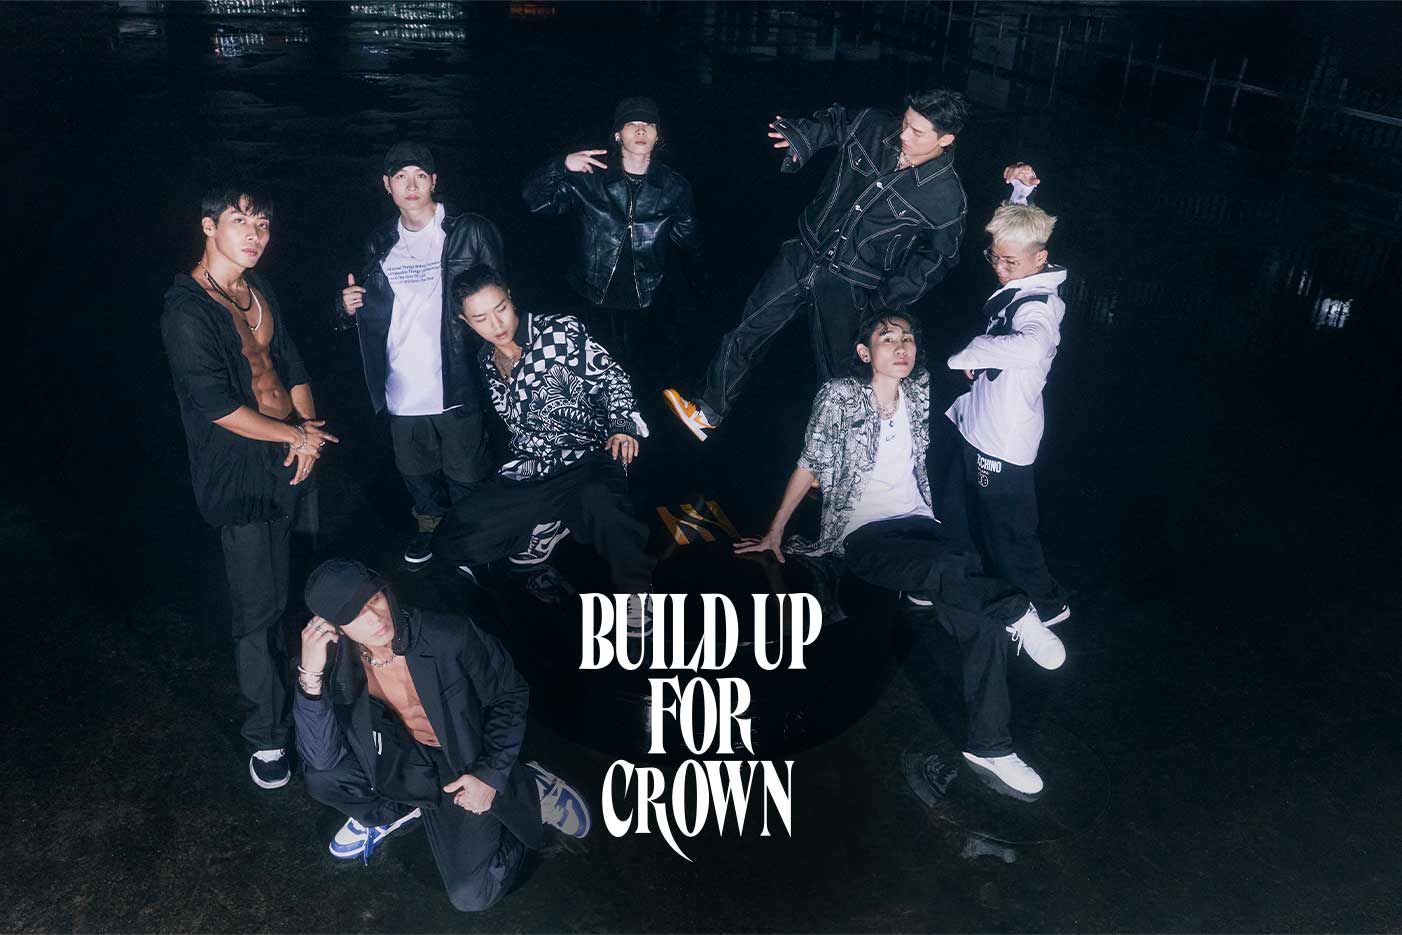 BULLD UP FOR CROWN